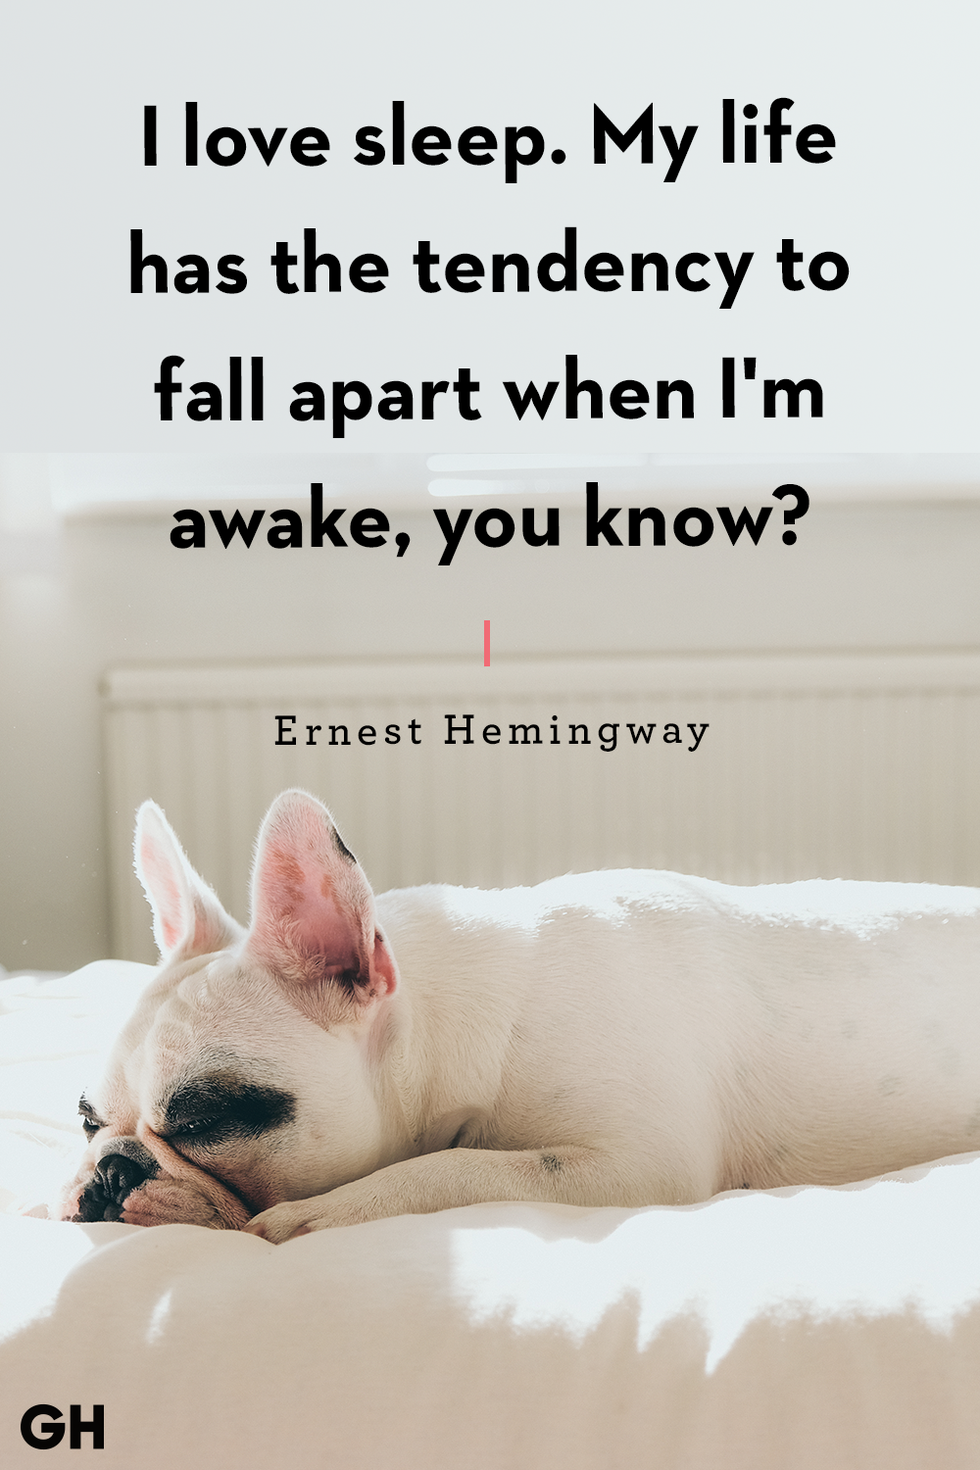 12 Quotes On People Who Just Love to Sleep